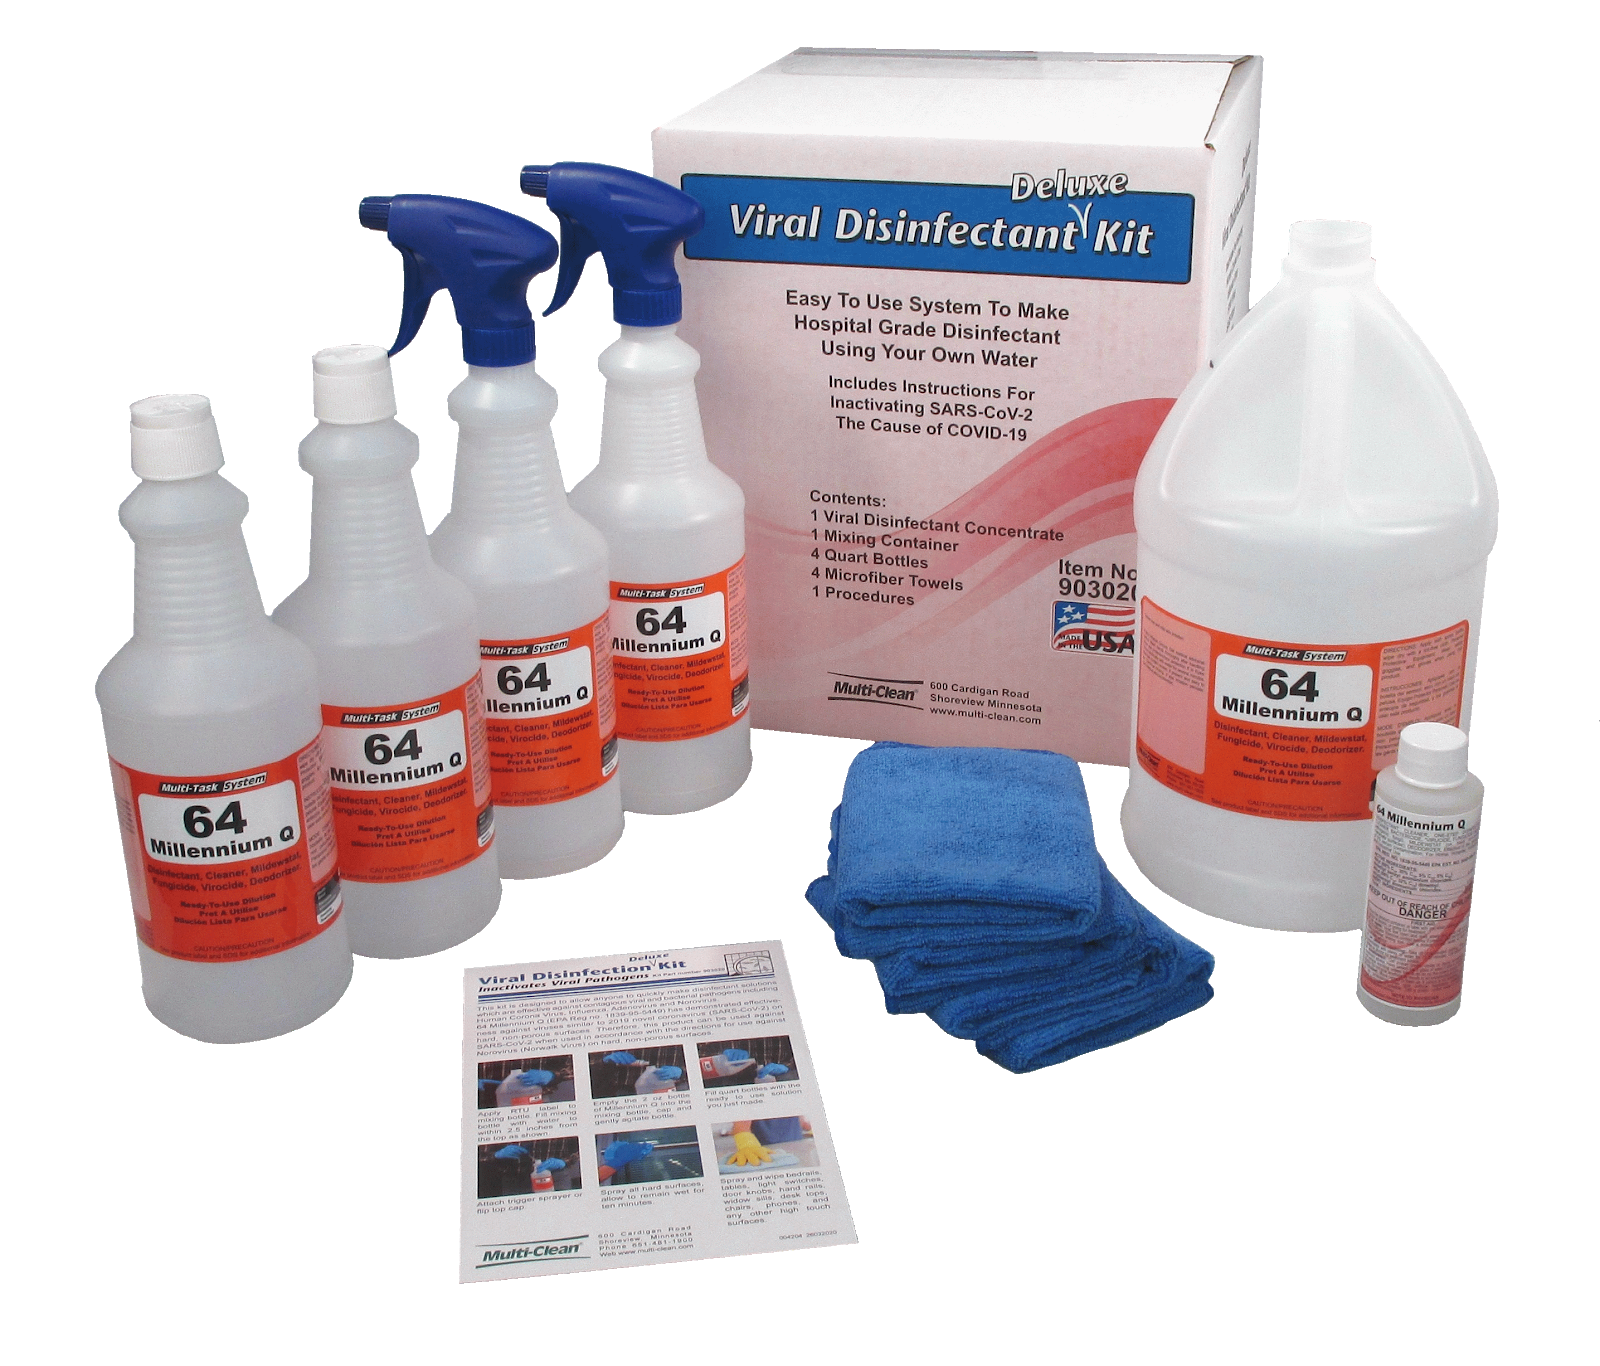 Multi-Clean has Right Products and Mindset to Combat COVID-19 Photo